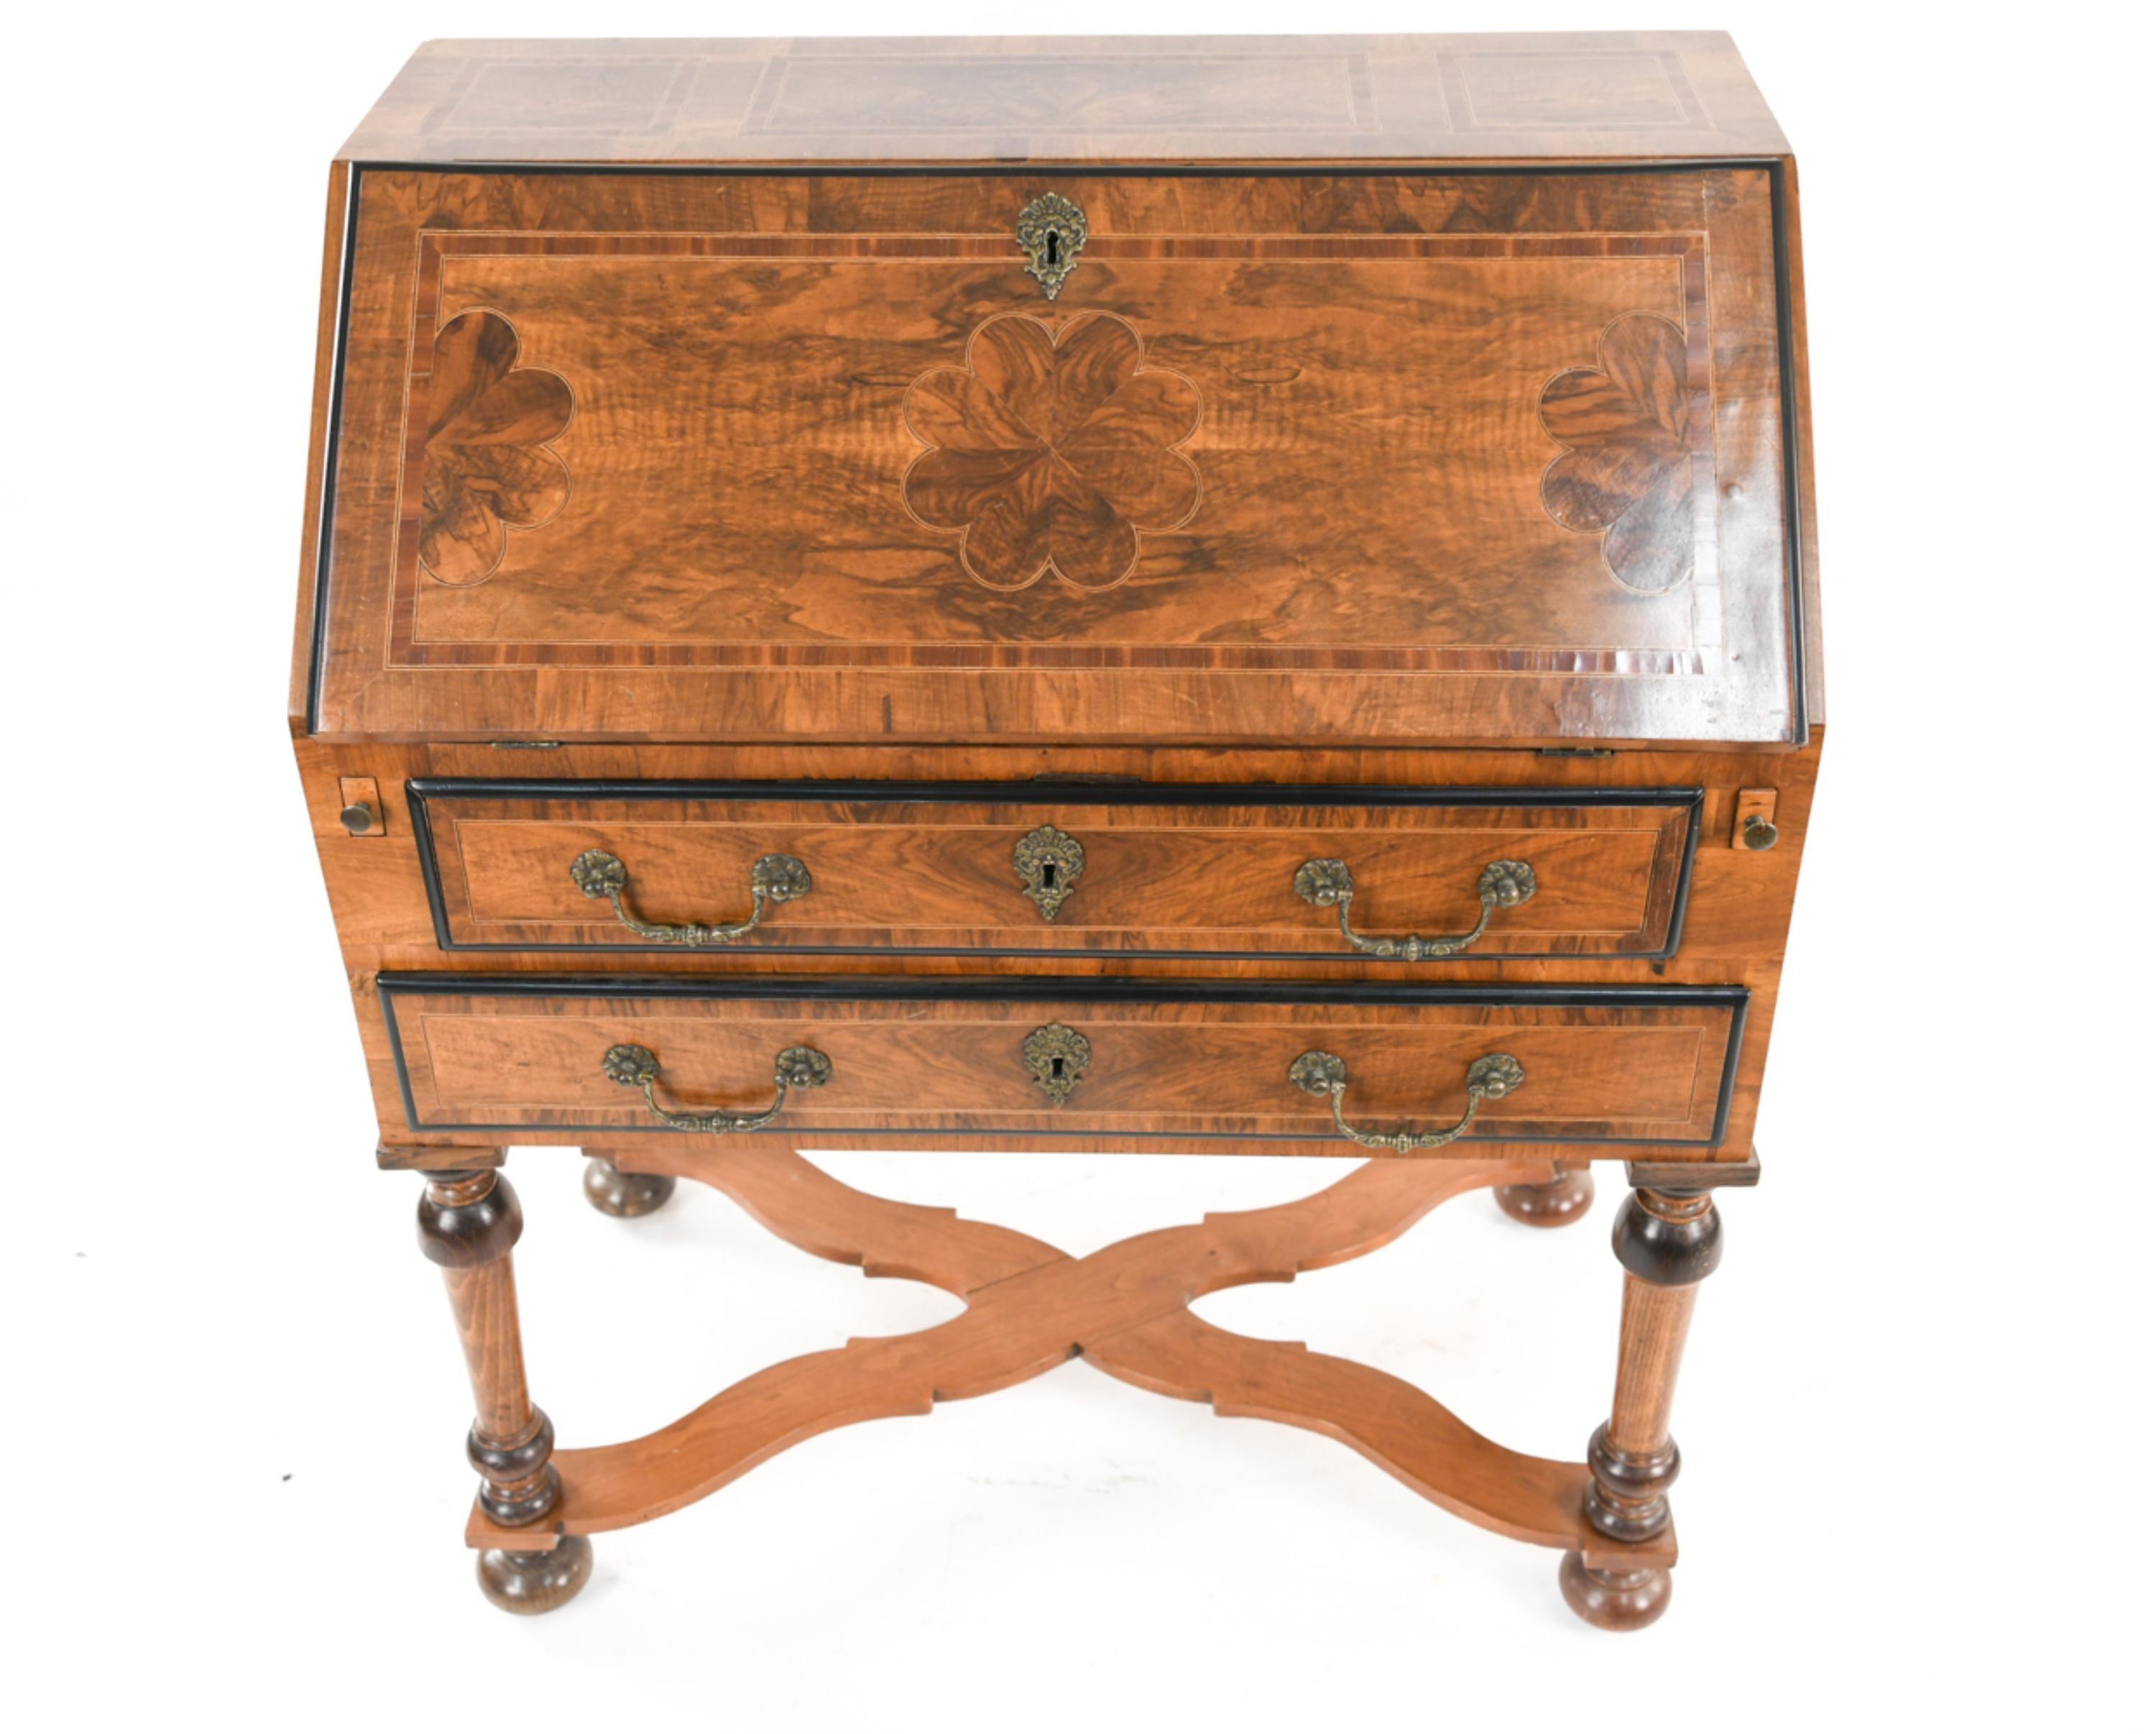 Fine example of William and Mary design with beautiful inlaid decoration. Desk with baluster leg supports joined with wavy cross stretchers, slanted drop front door supported by two pullout / pull-out supports when opened, interior with 8 drawers